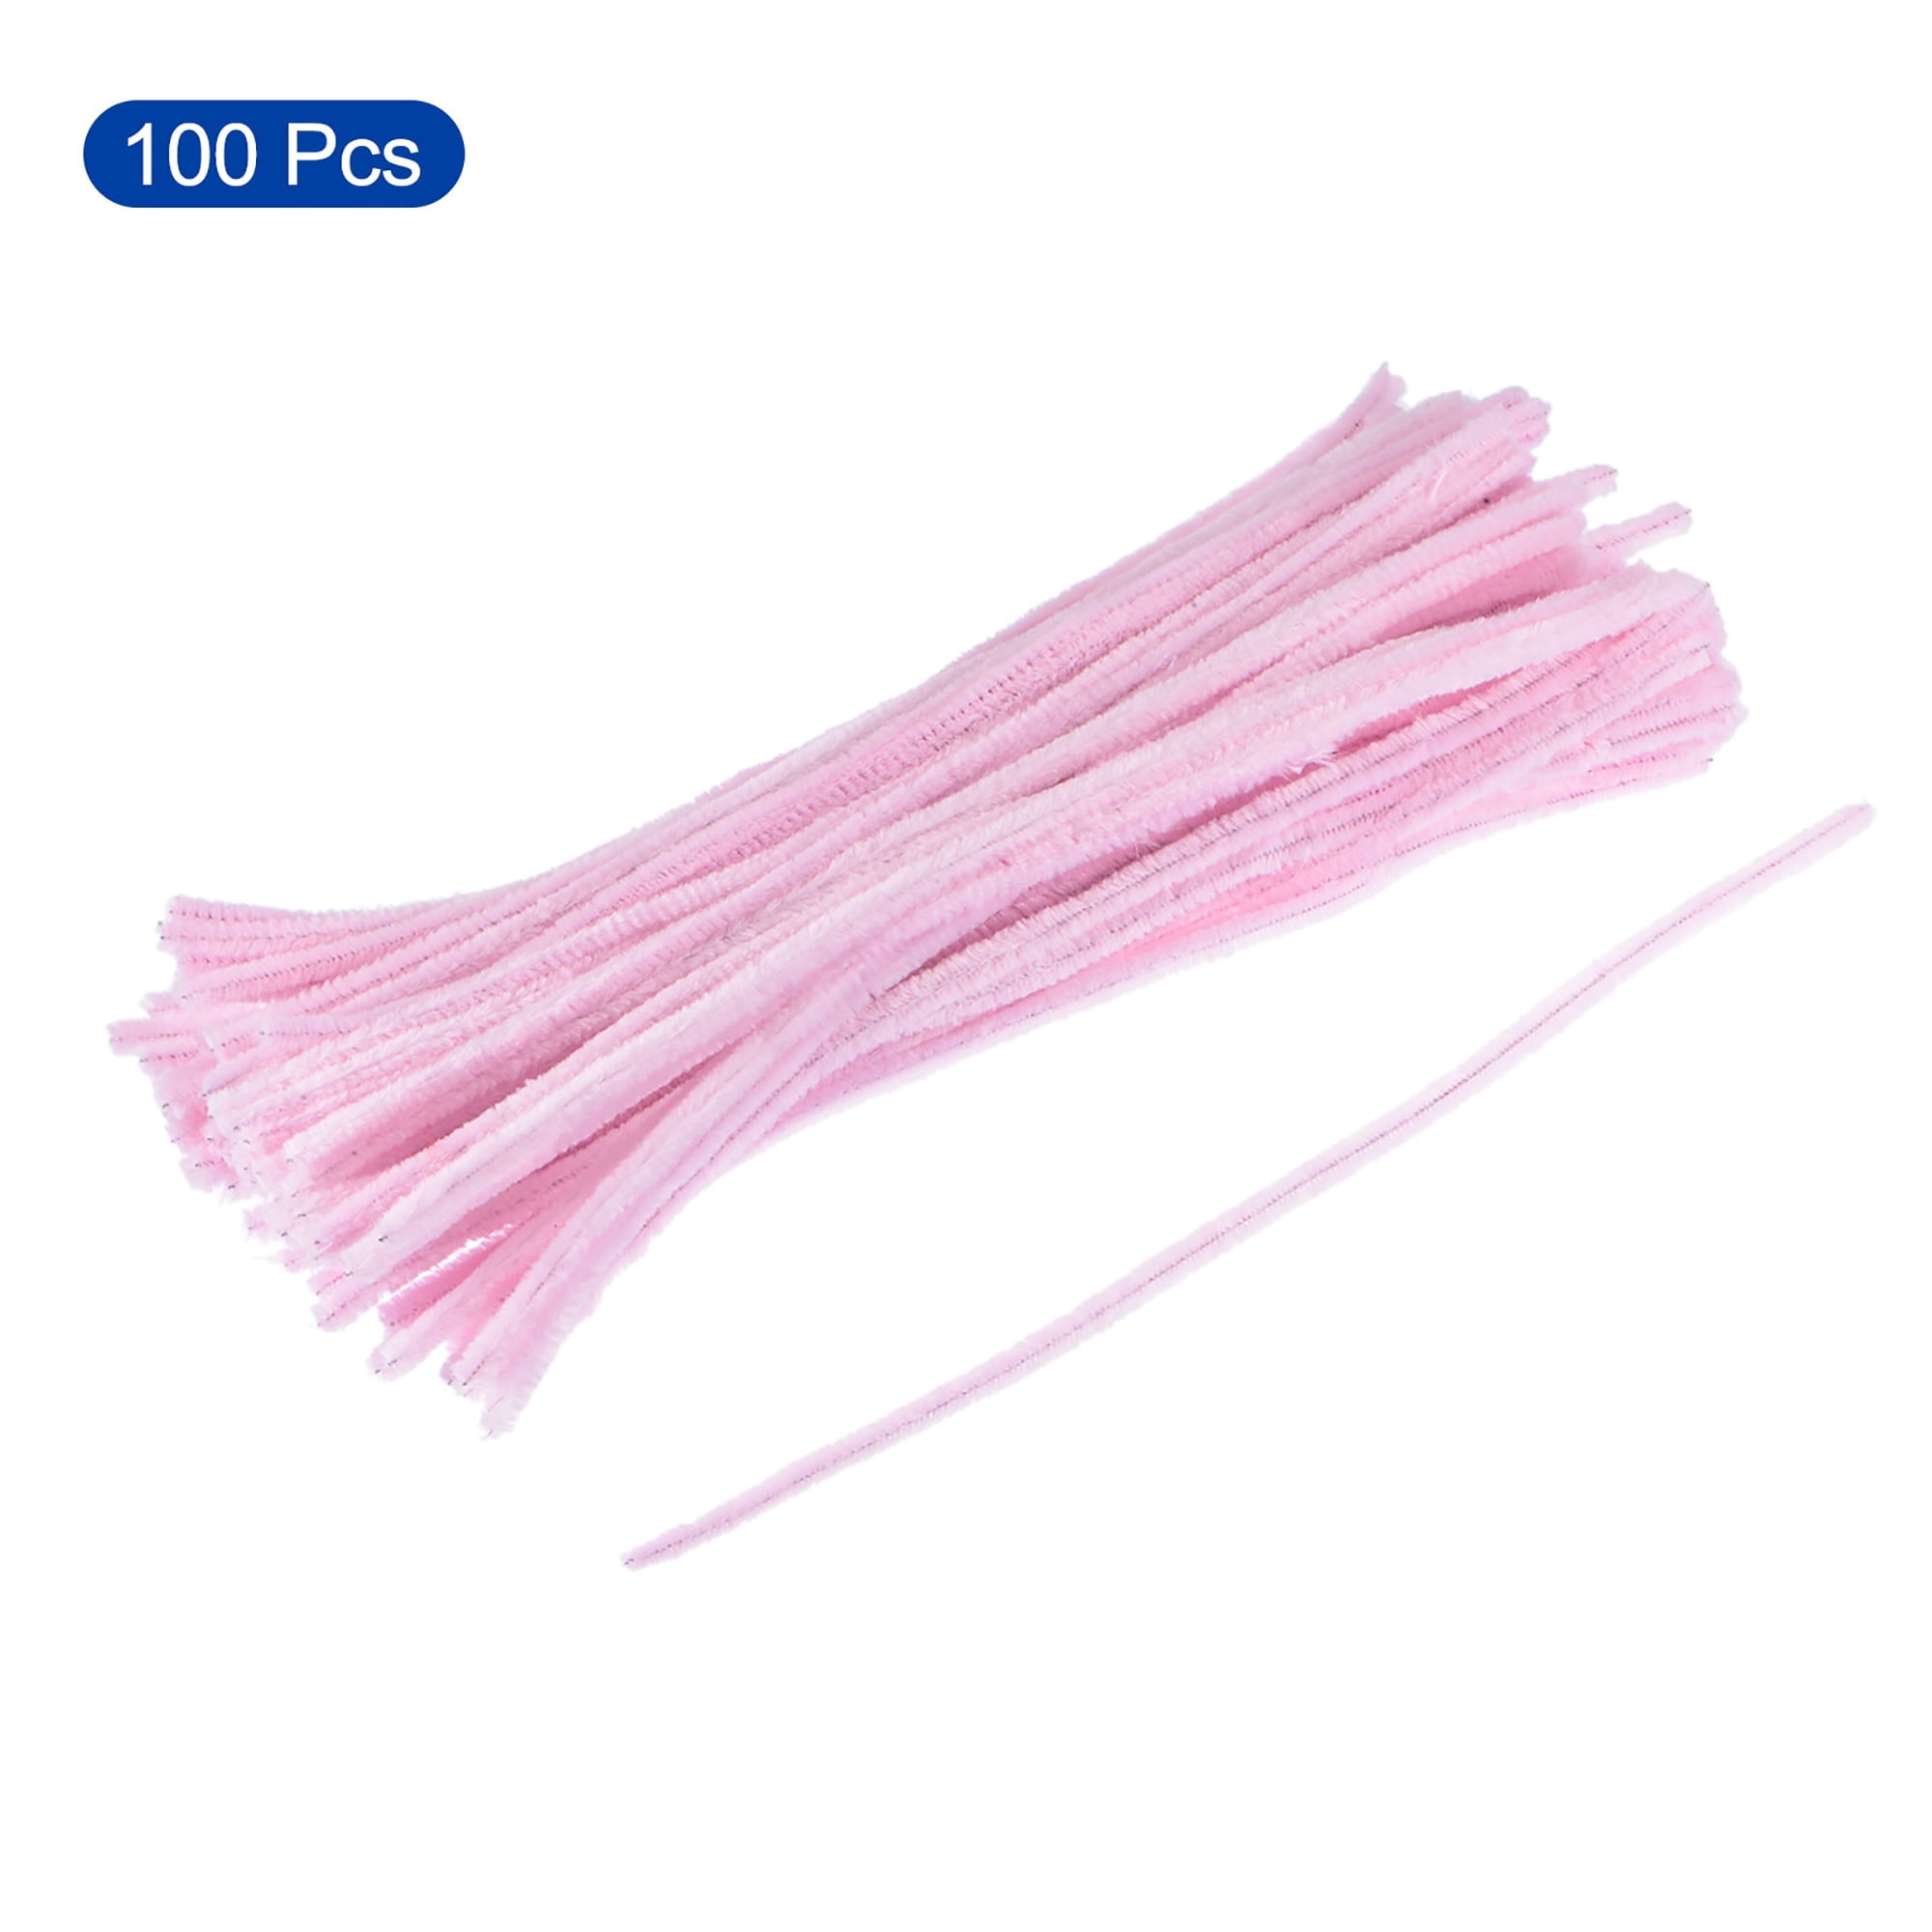 30cm Chenille Craft Stems Pipe Cleaners Arts & Crafts Flexible Bendy  Glitter UK